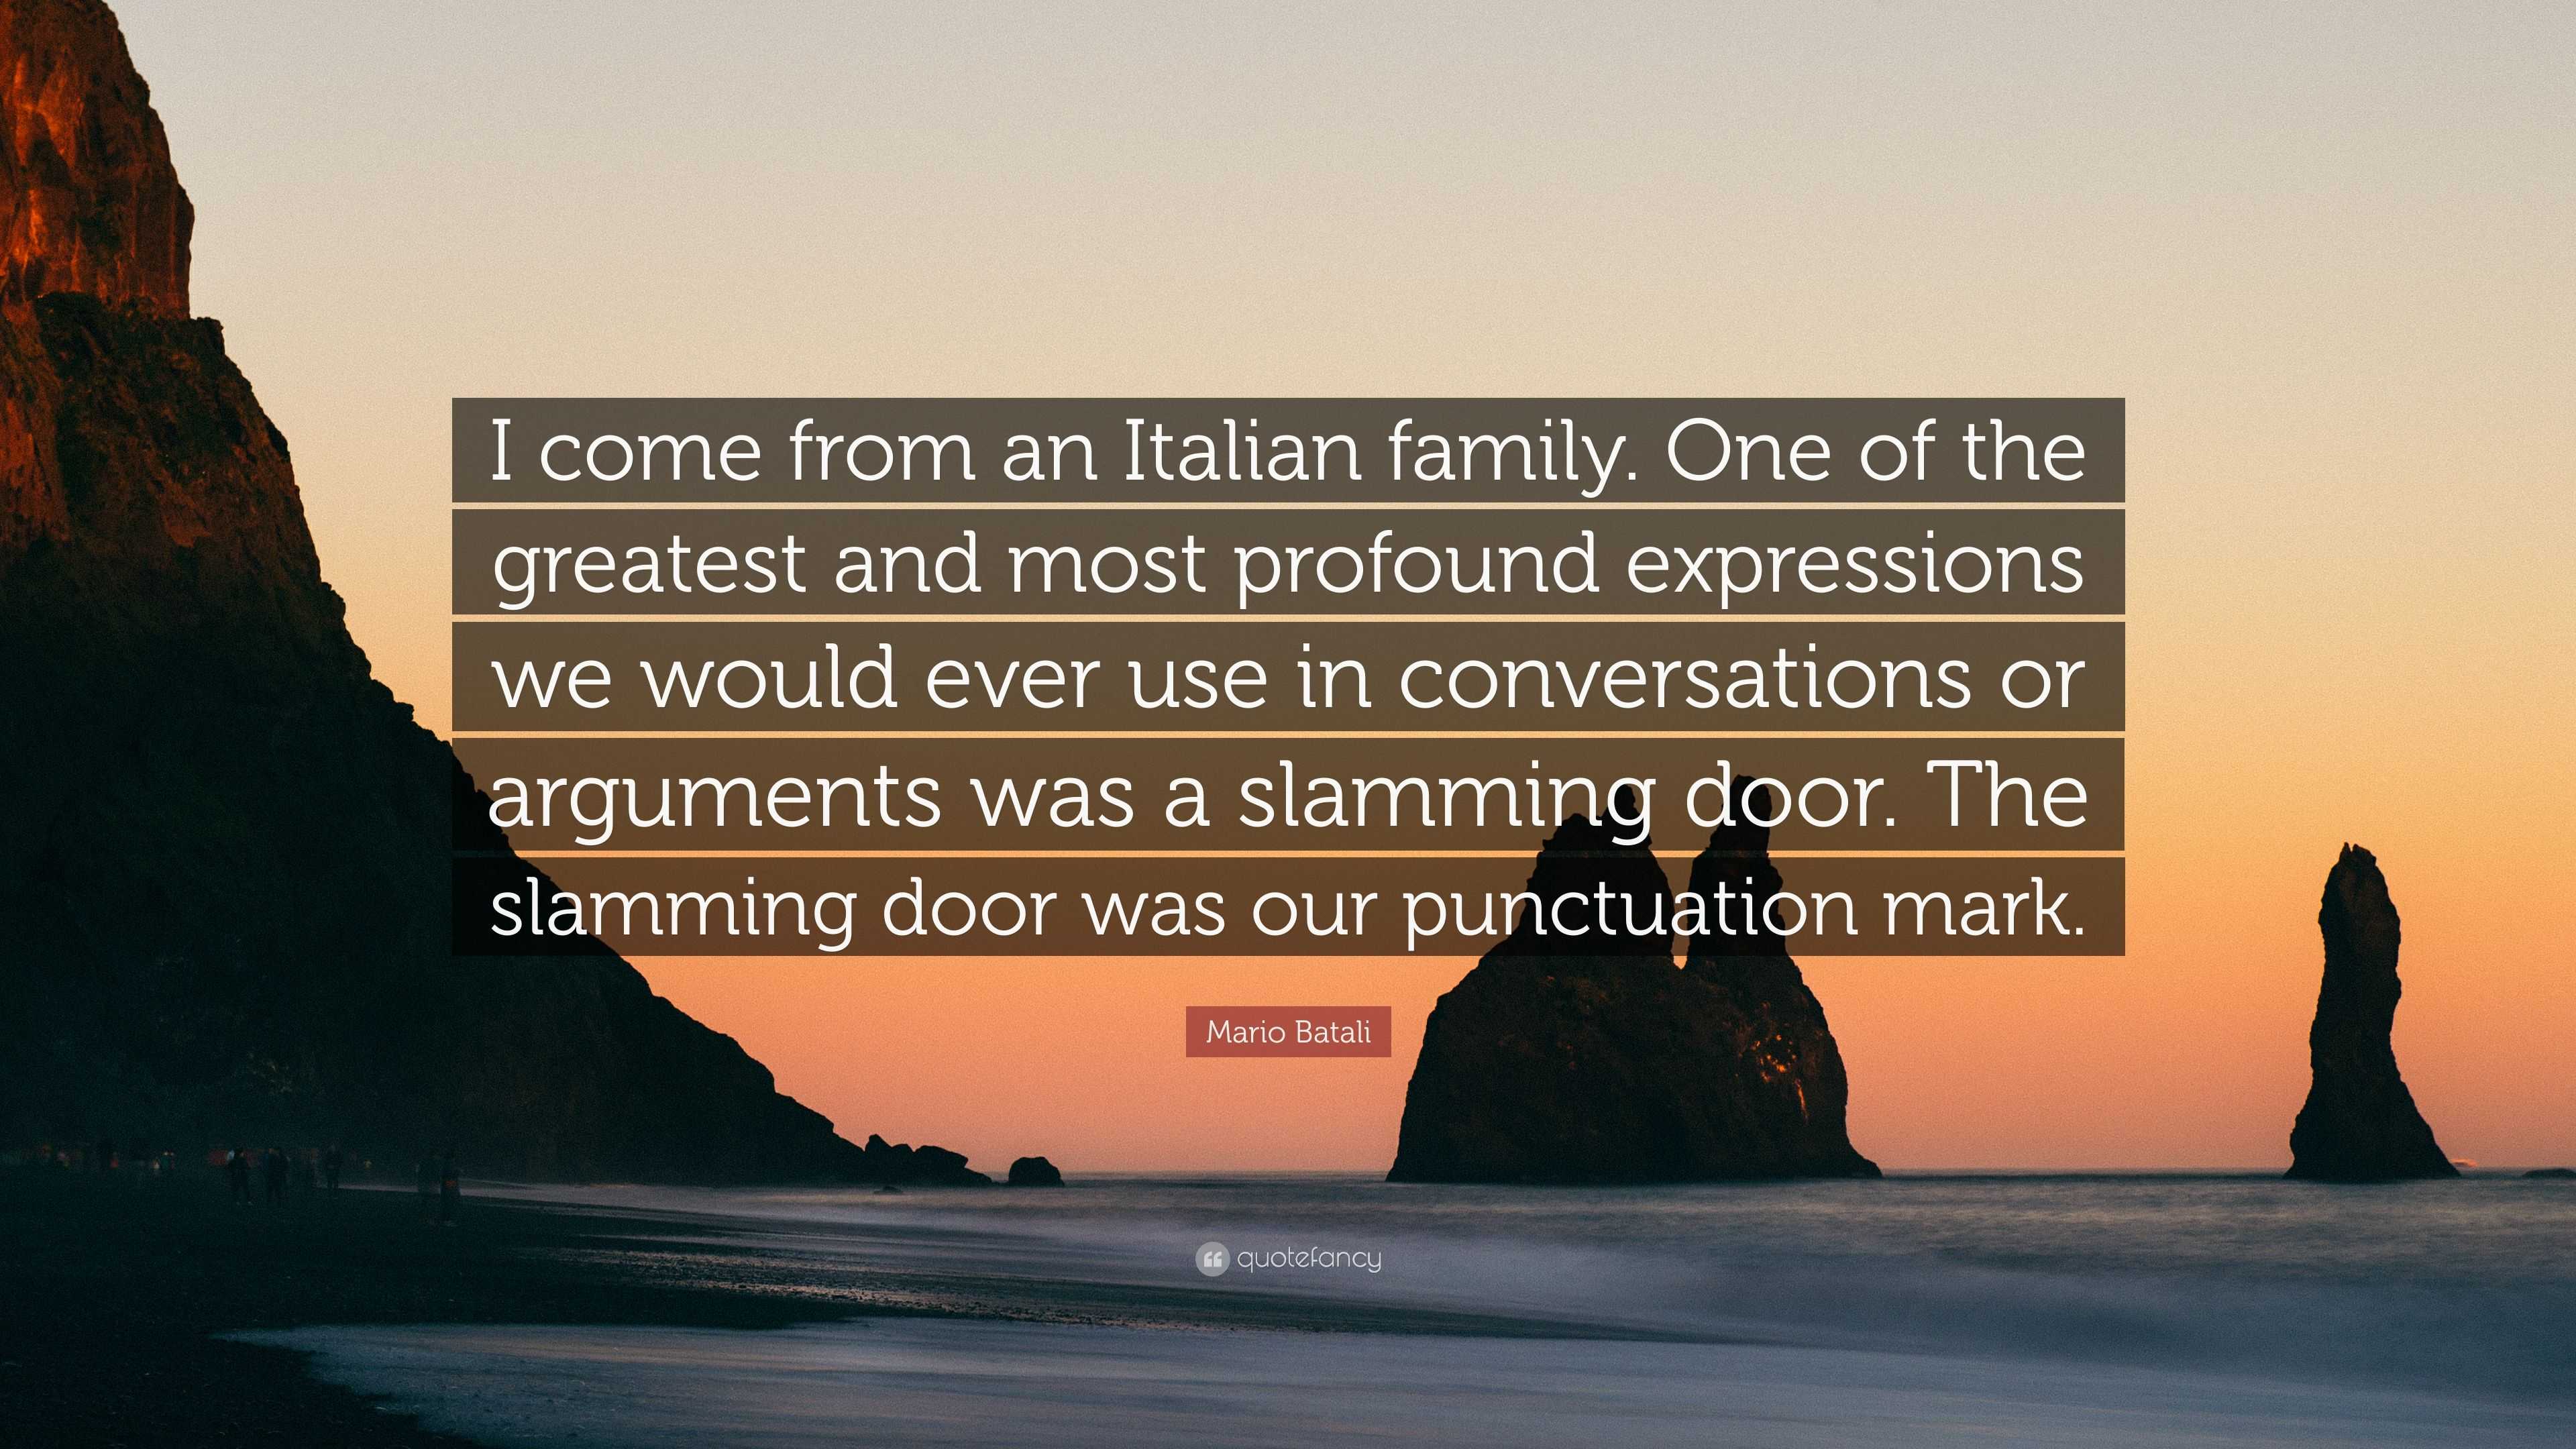 Mario Batali Quote: “I come from an Italian family. One of the greatest and  most profound expressions we would ever use in conversations or a”